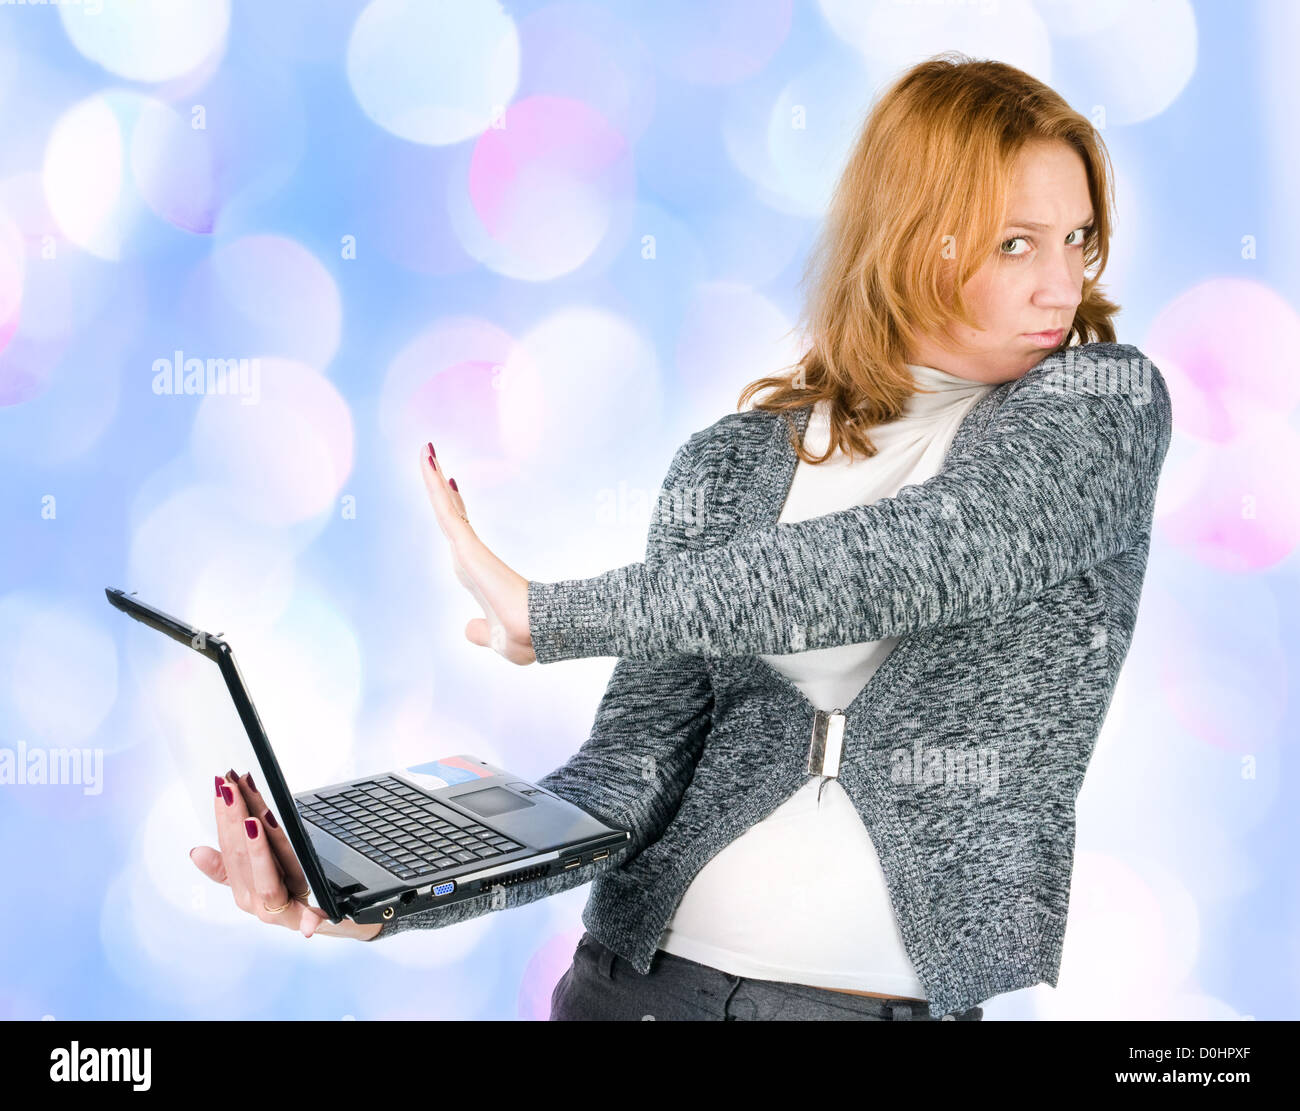 girl does not wish to work on the laptop with blue lights in the background Stock Photo